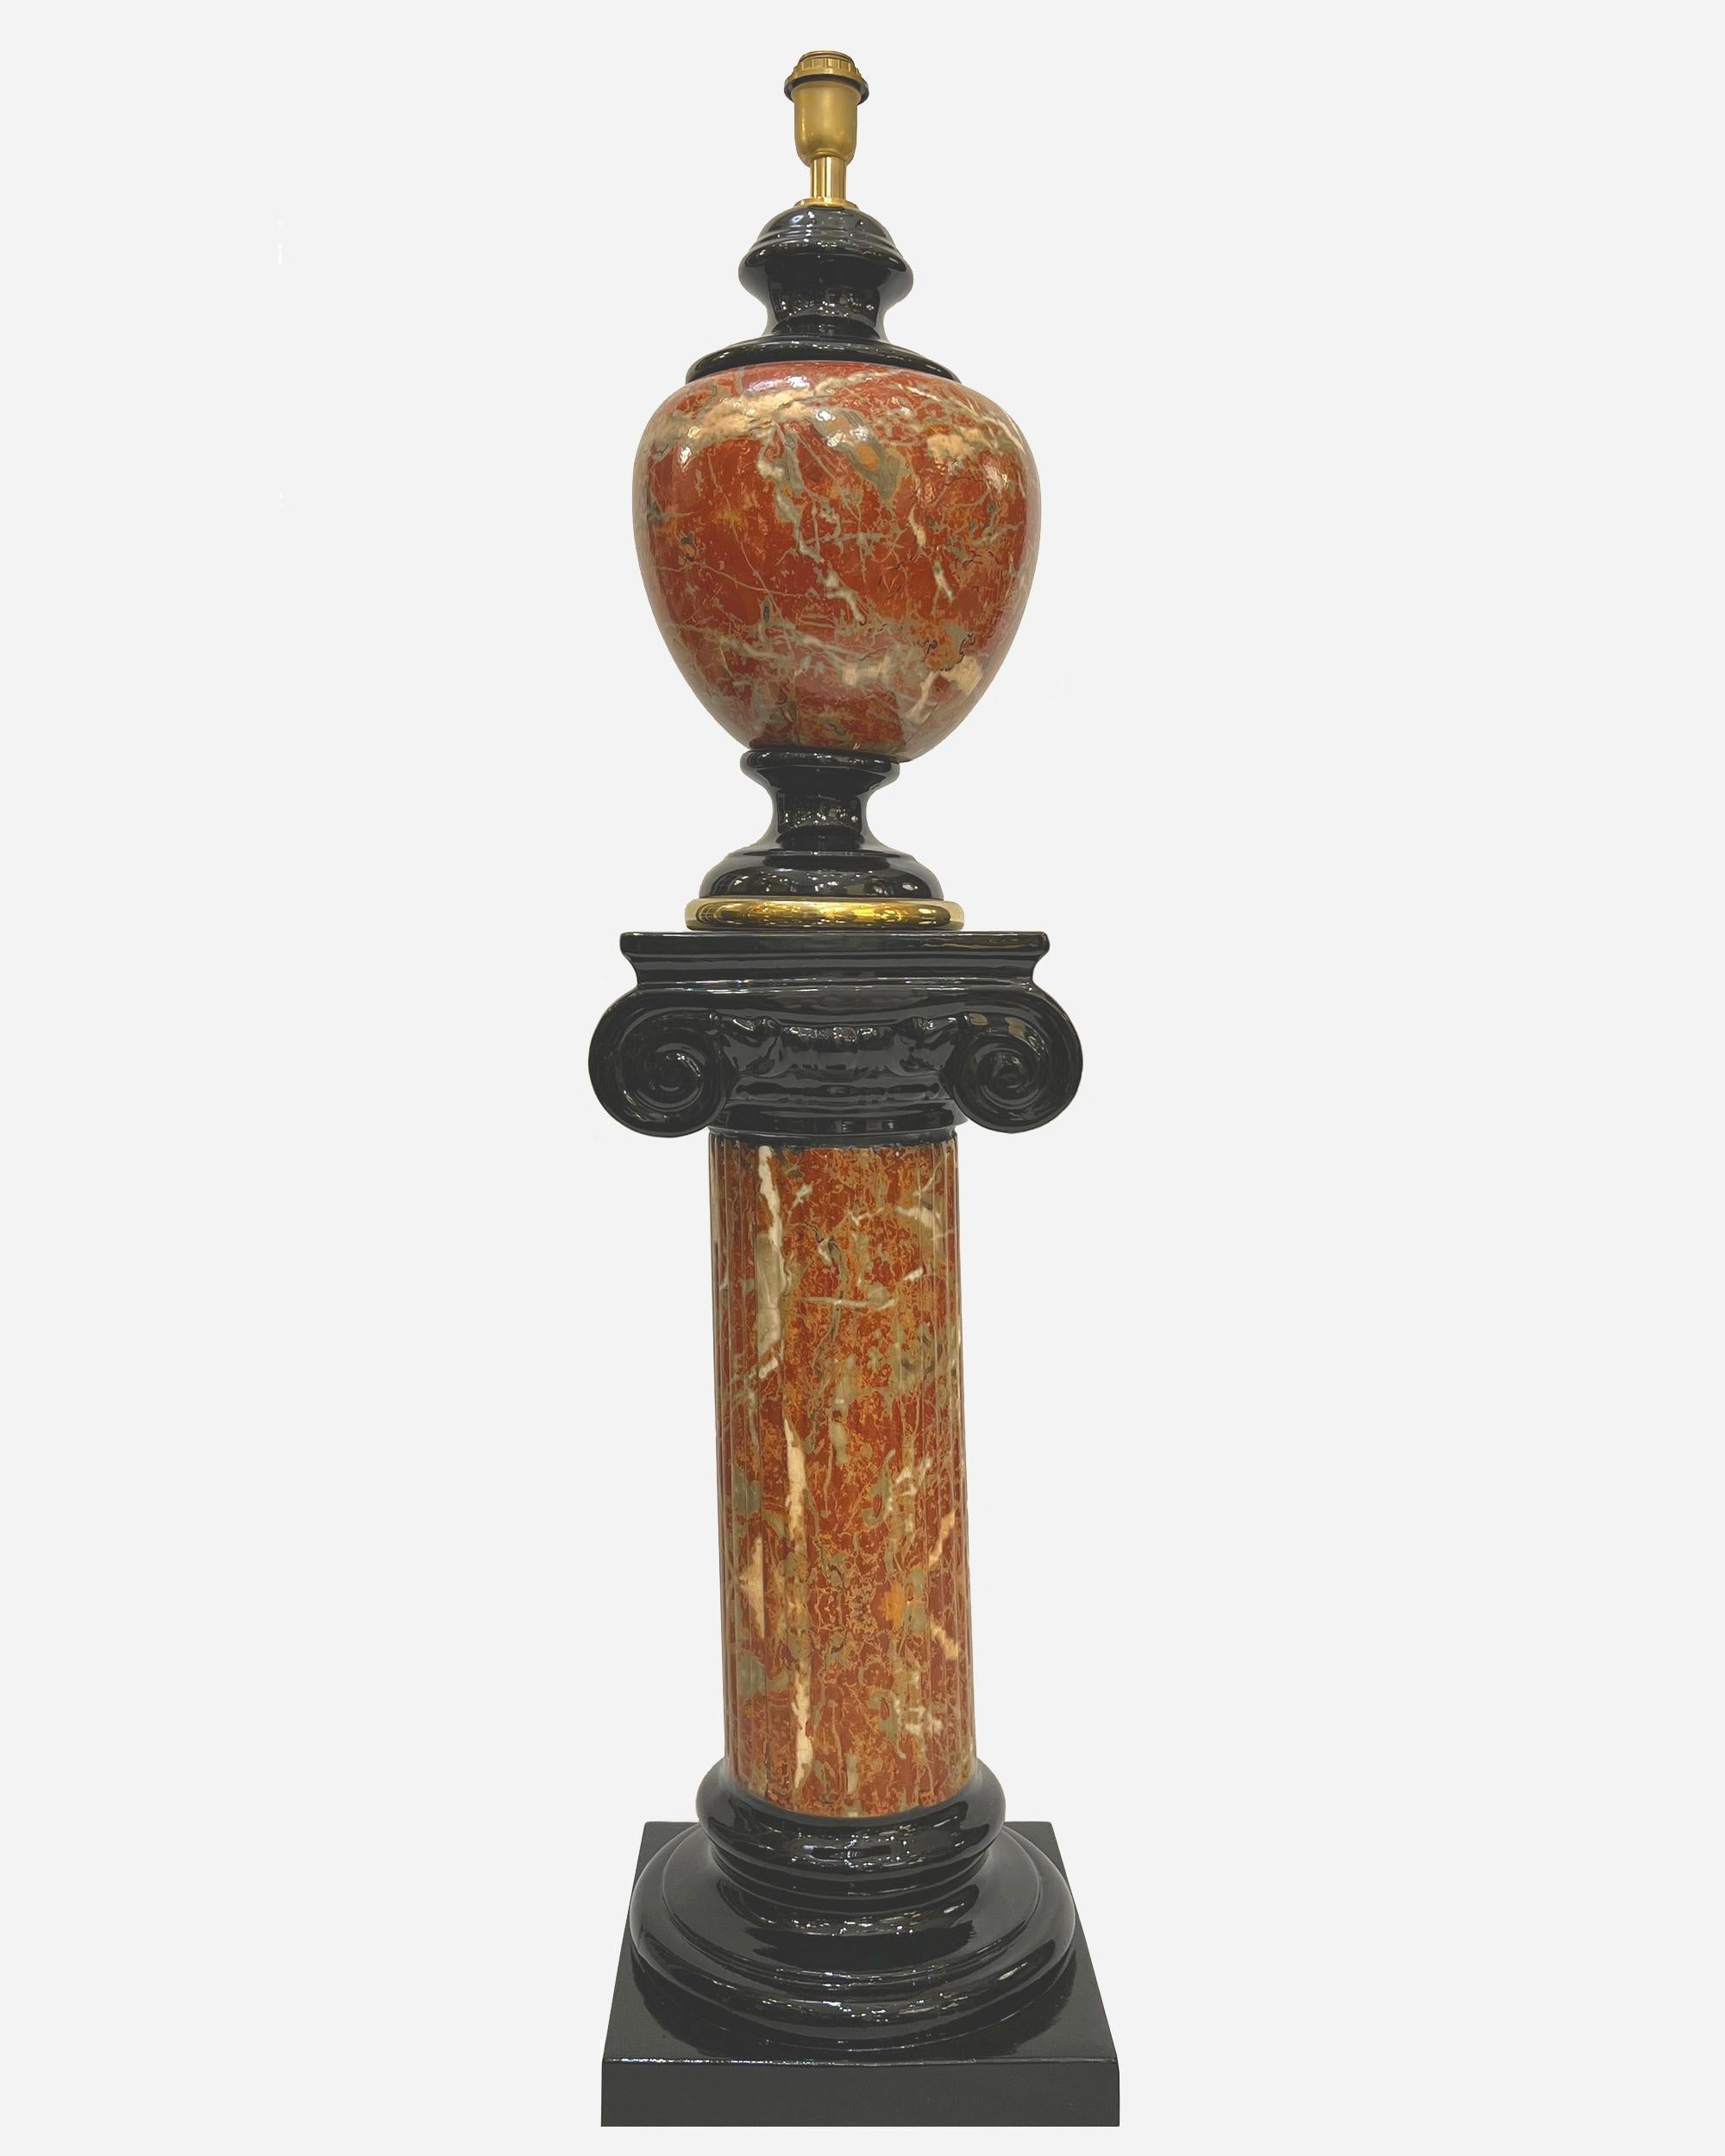 Pair of ceramic lamps and columns, with trompe-l’oeil enameled decoration of gray and white veined red marble and black lacquer. The bases of the lamps are enhanced by a gilded fillet.
Lamp height: 58 cm (22.8 inches)
Lamp diameter: 30 cm (11.8